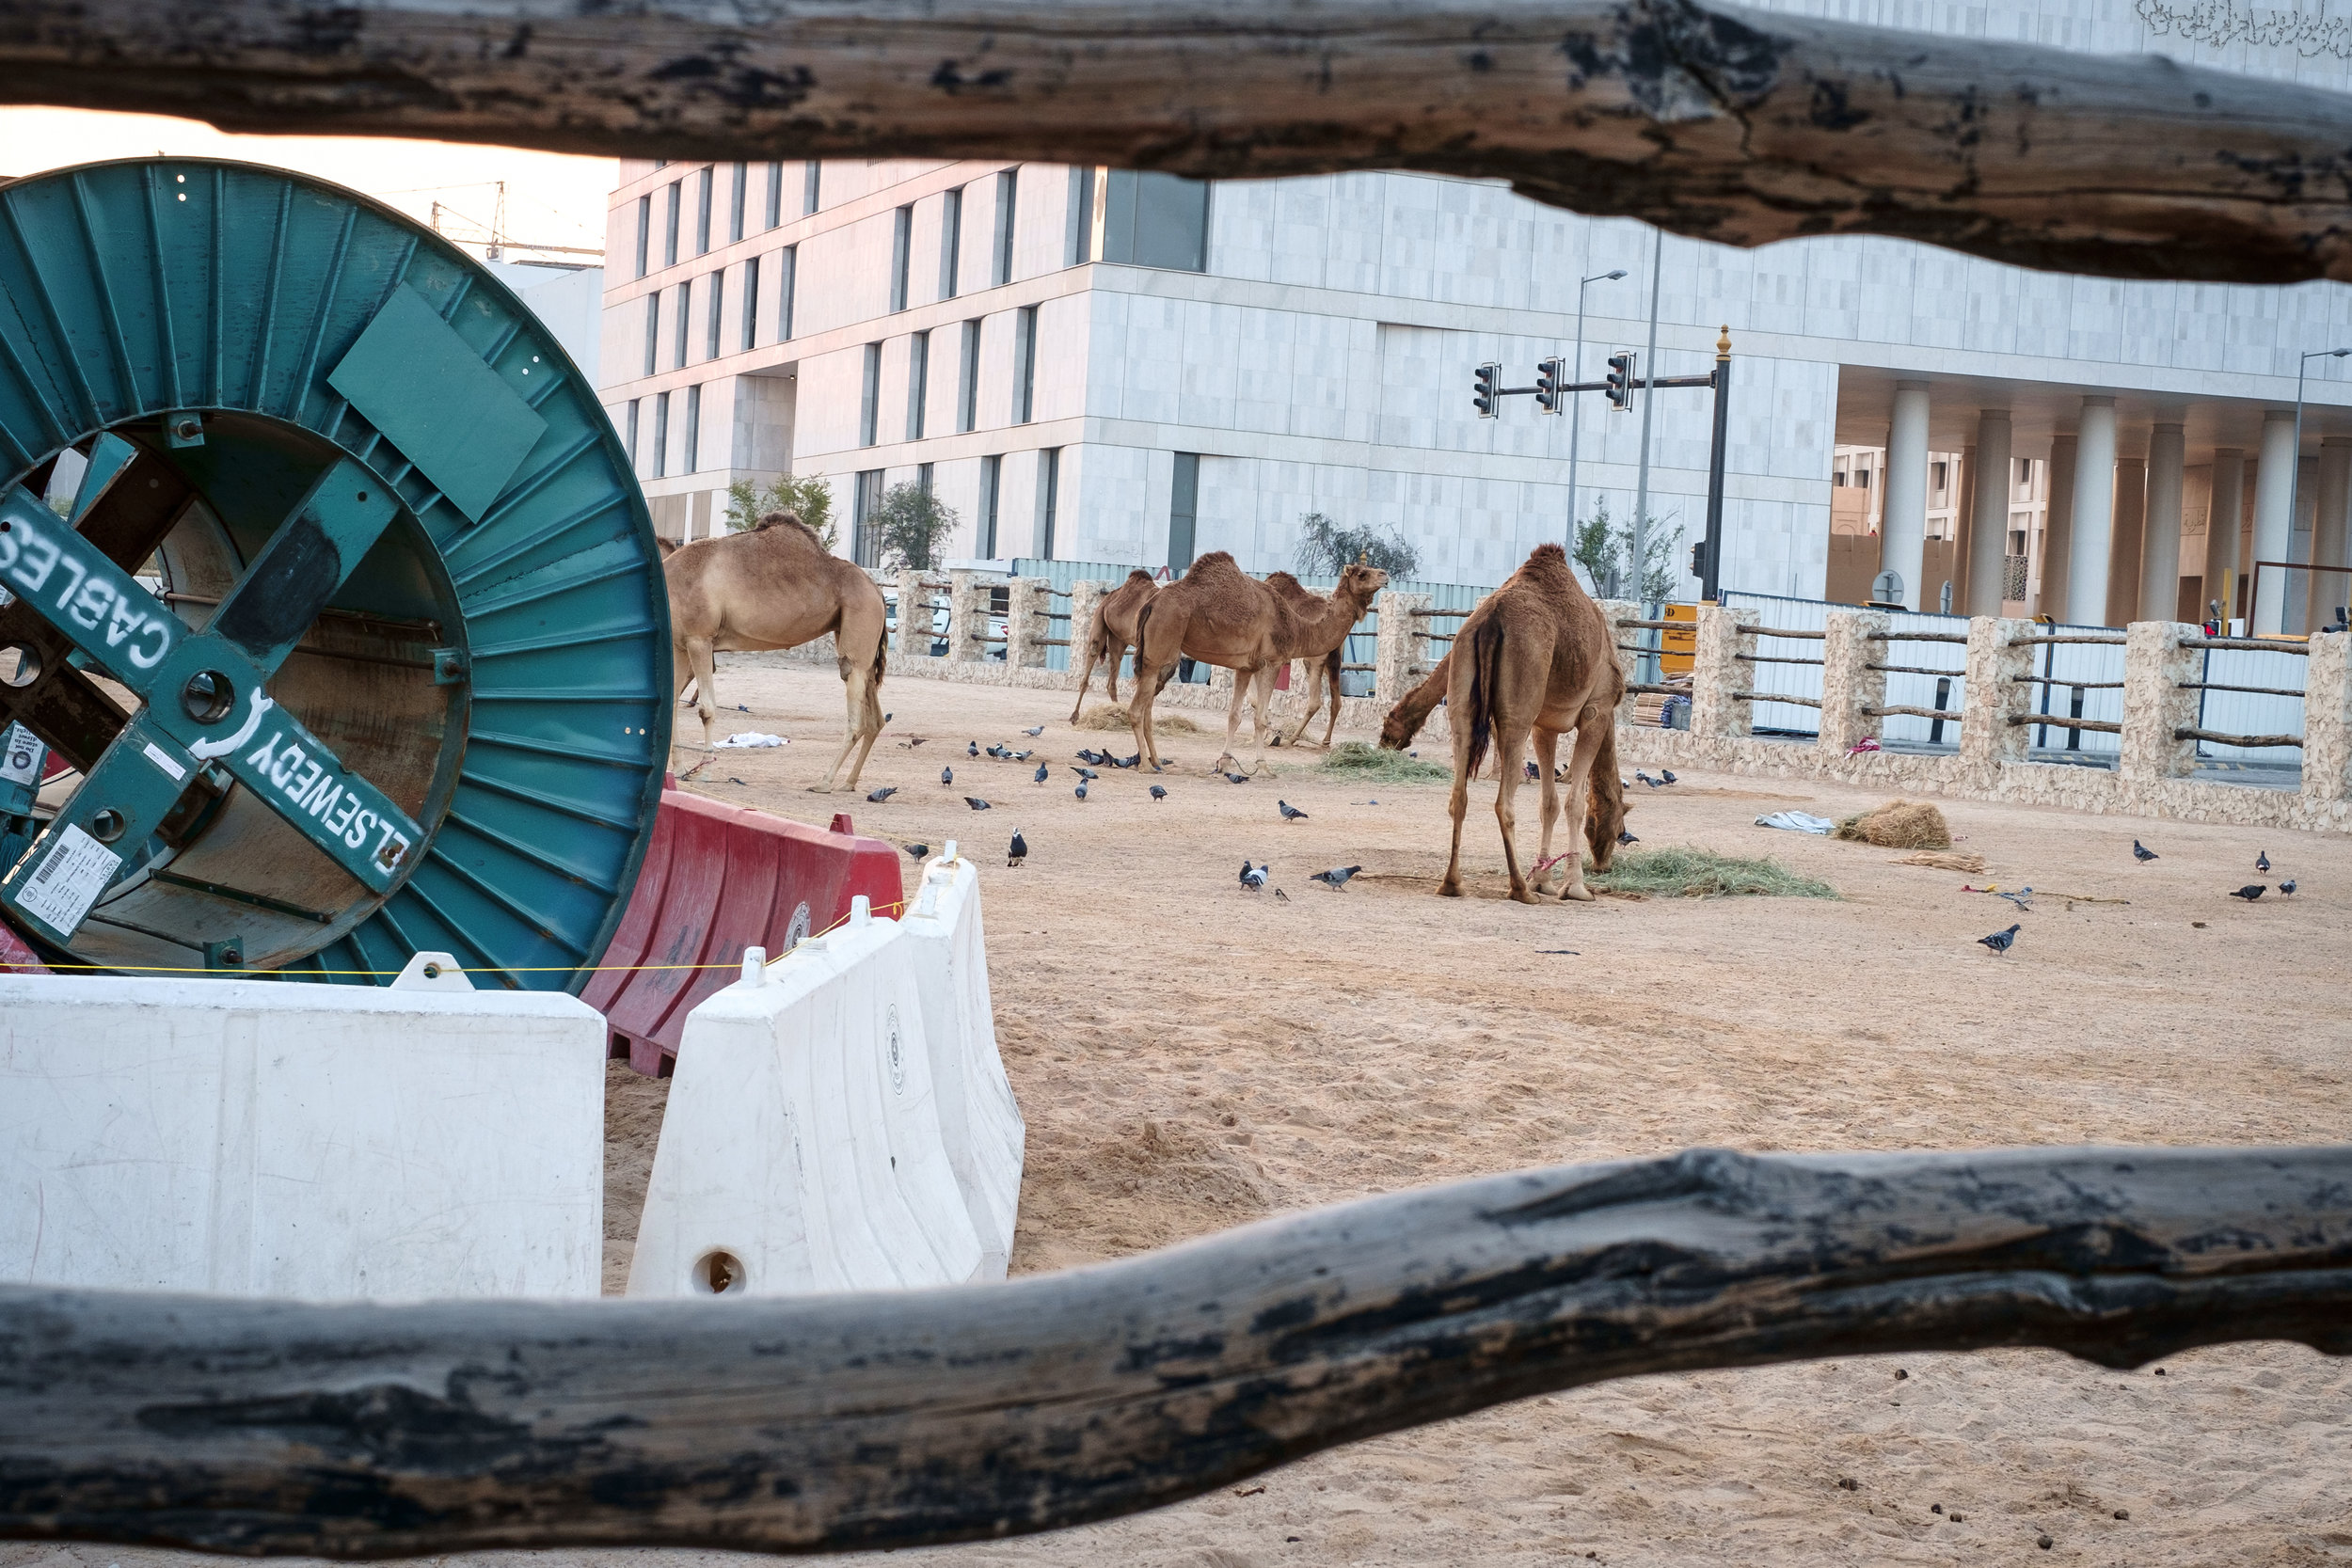  Part construction scene, part camel pen at Souq Waqif in Doha. Qatar is in a race to revitalize and modernize in time to host the 2022 FIFA World Cup. 